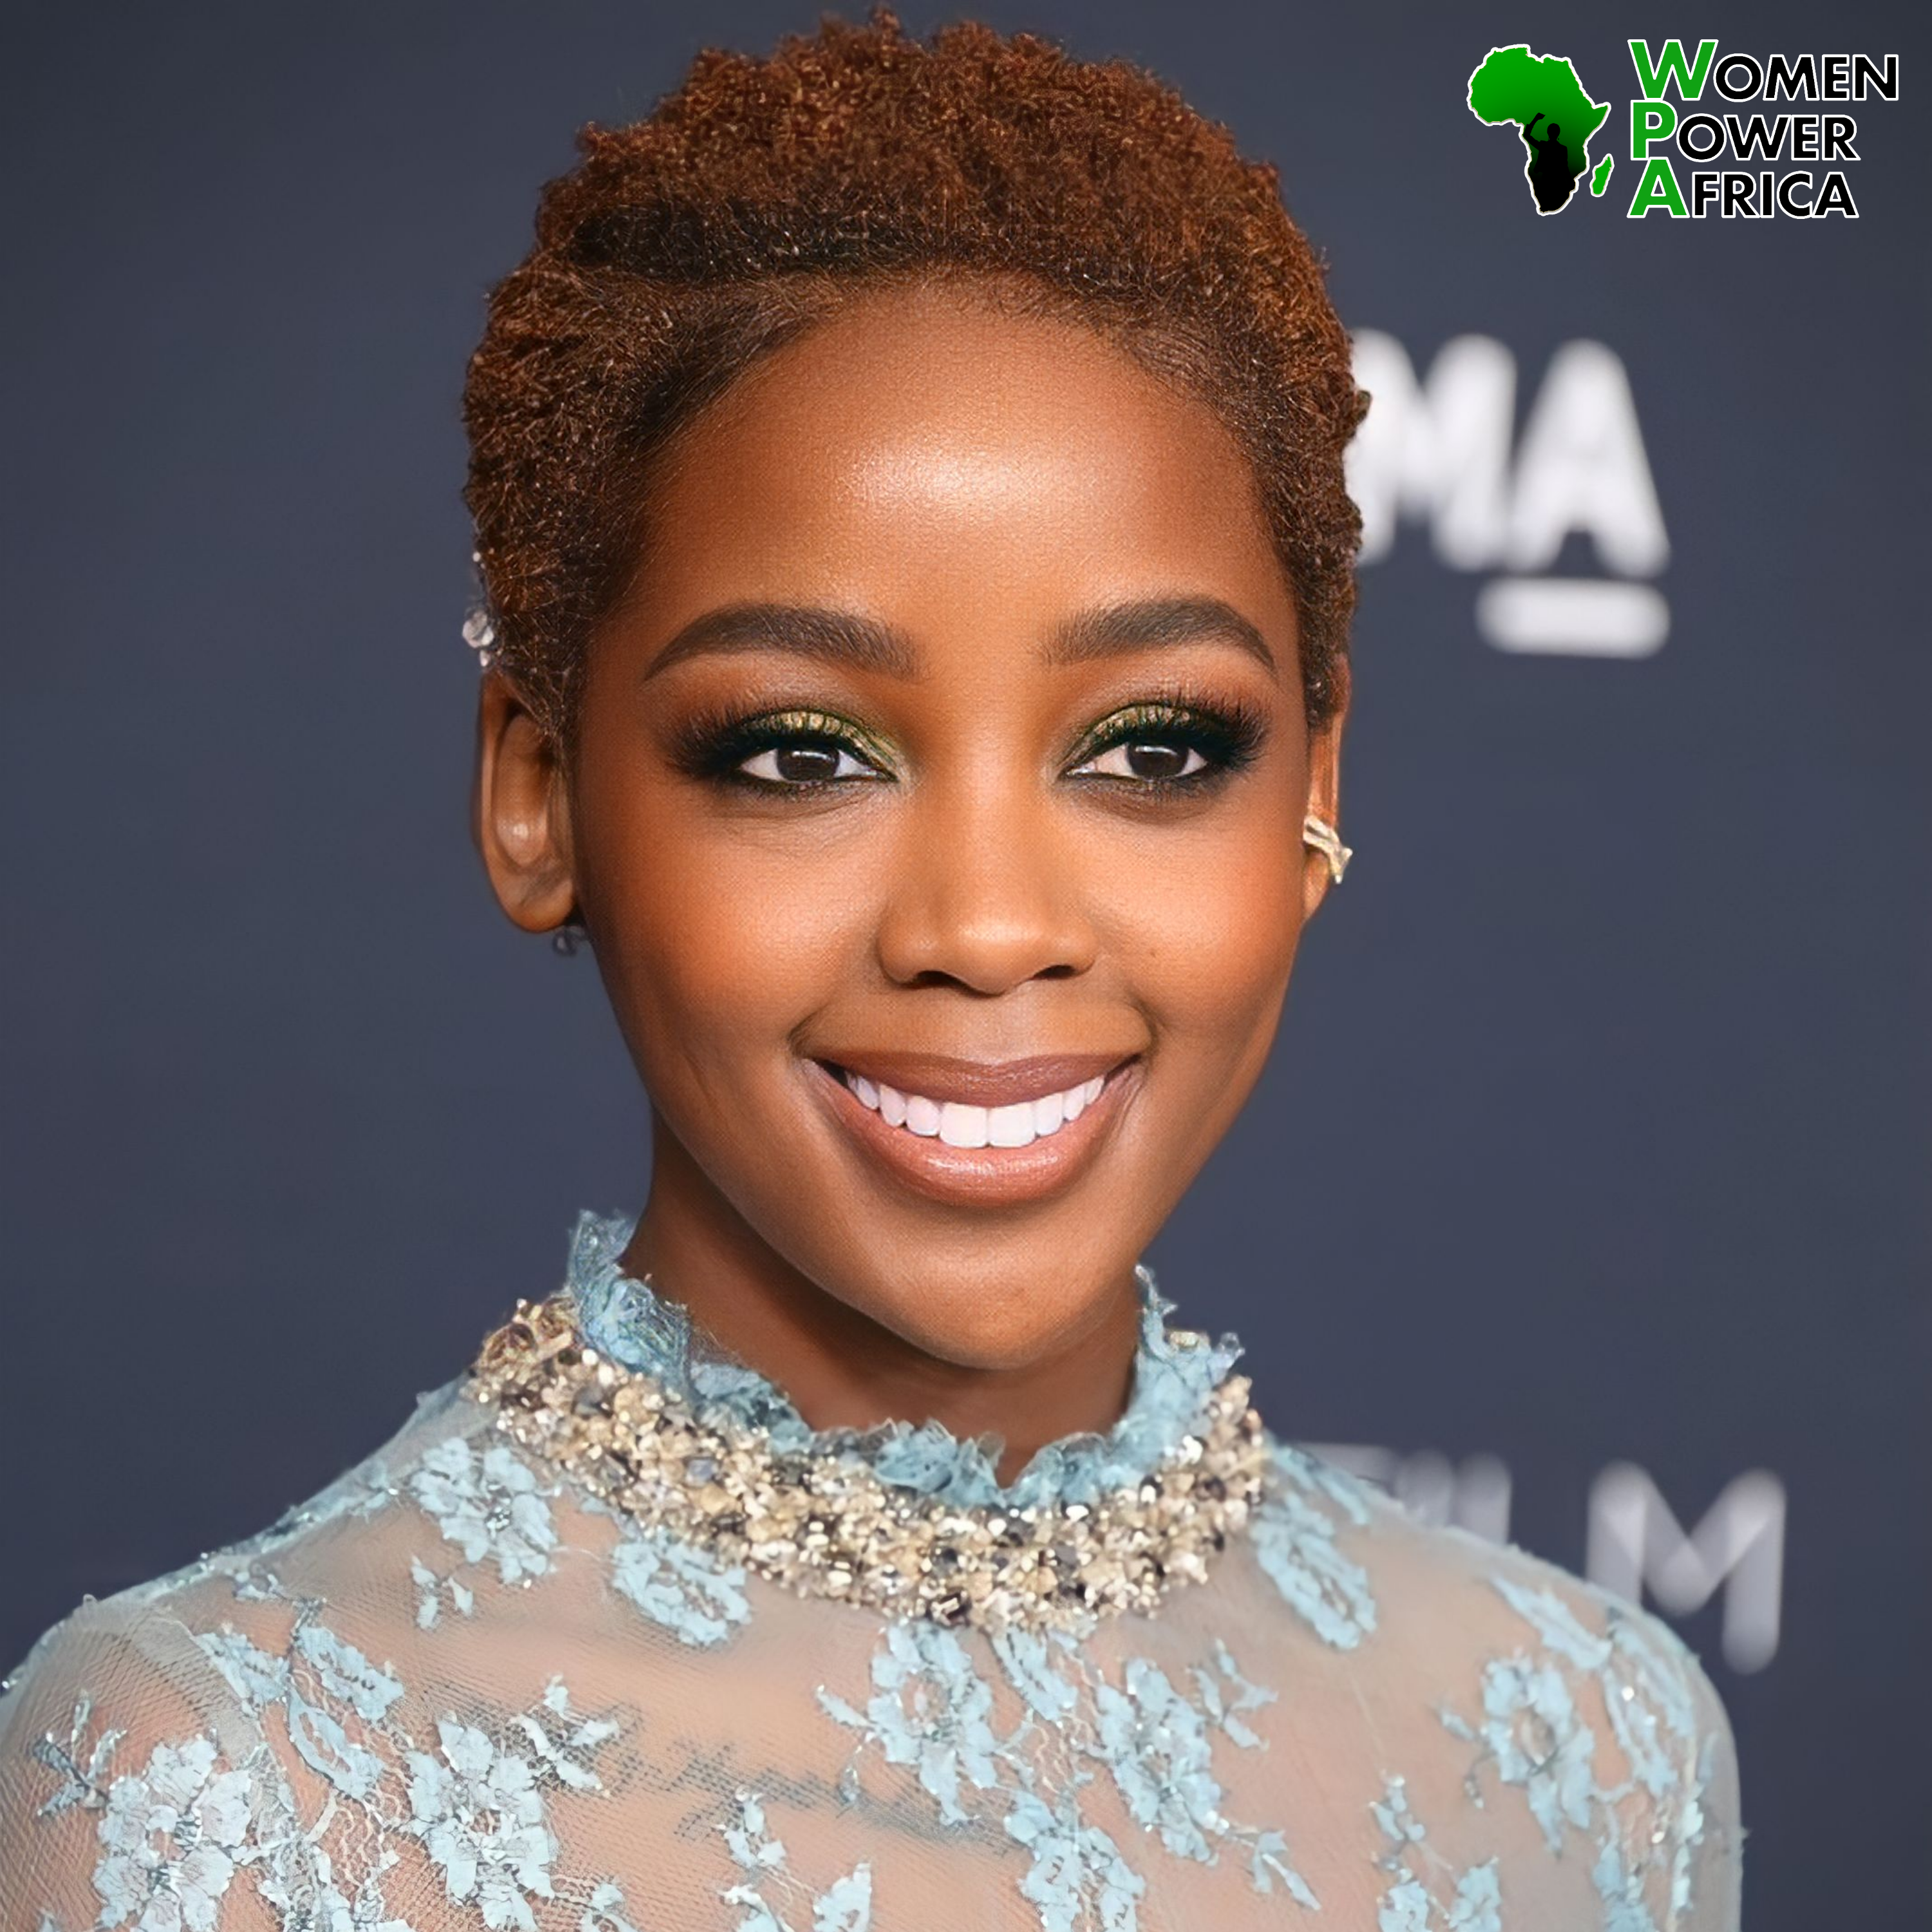 Thuso Mbedu: The Remarkable Actress from South Africa.